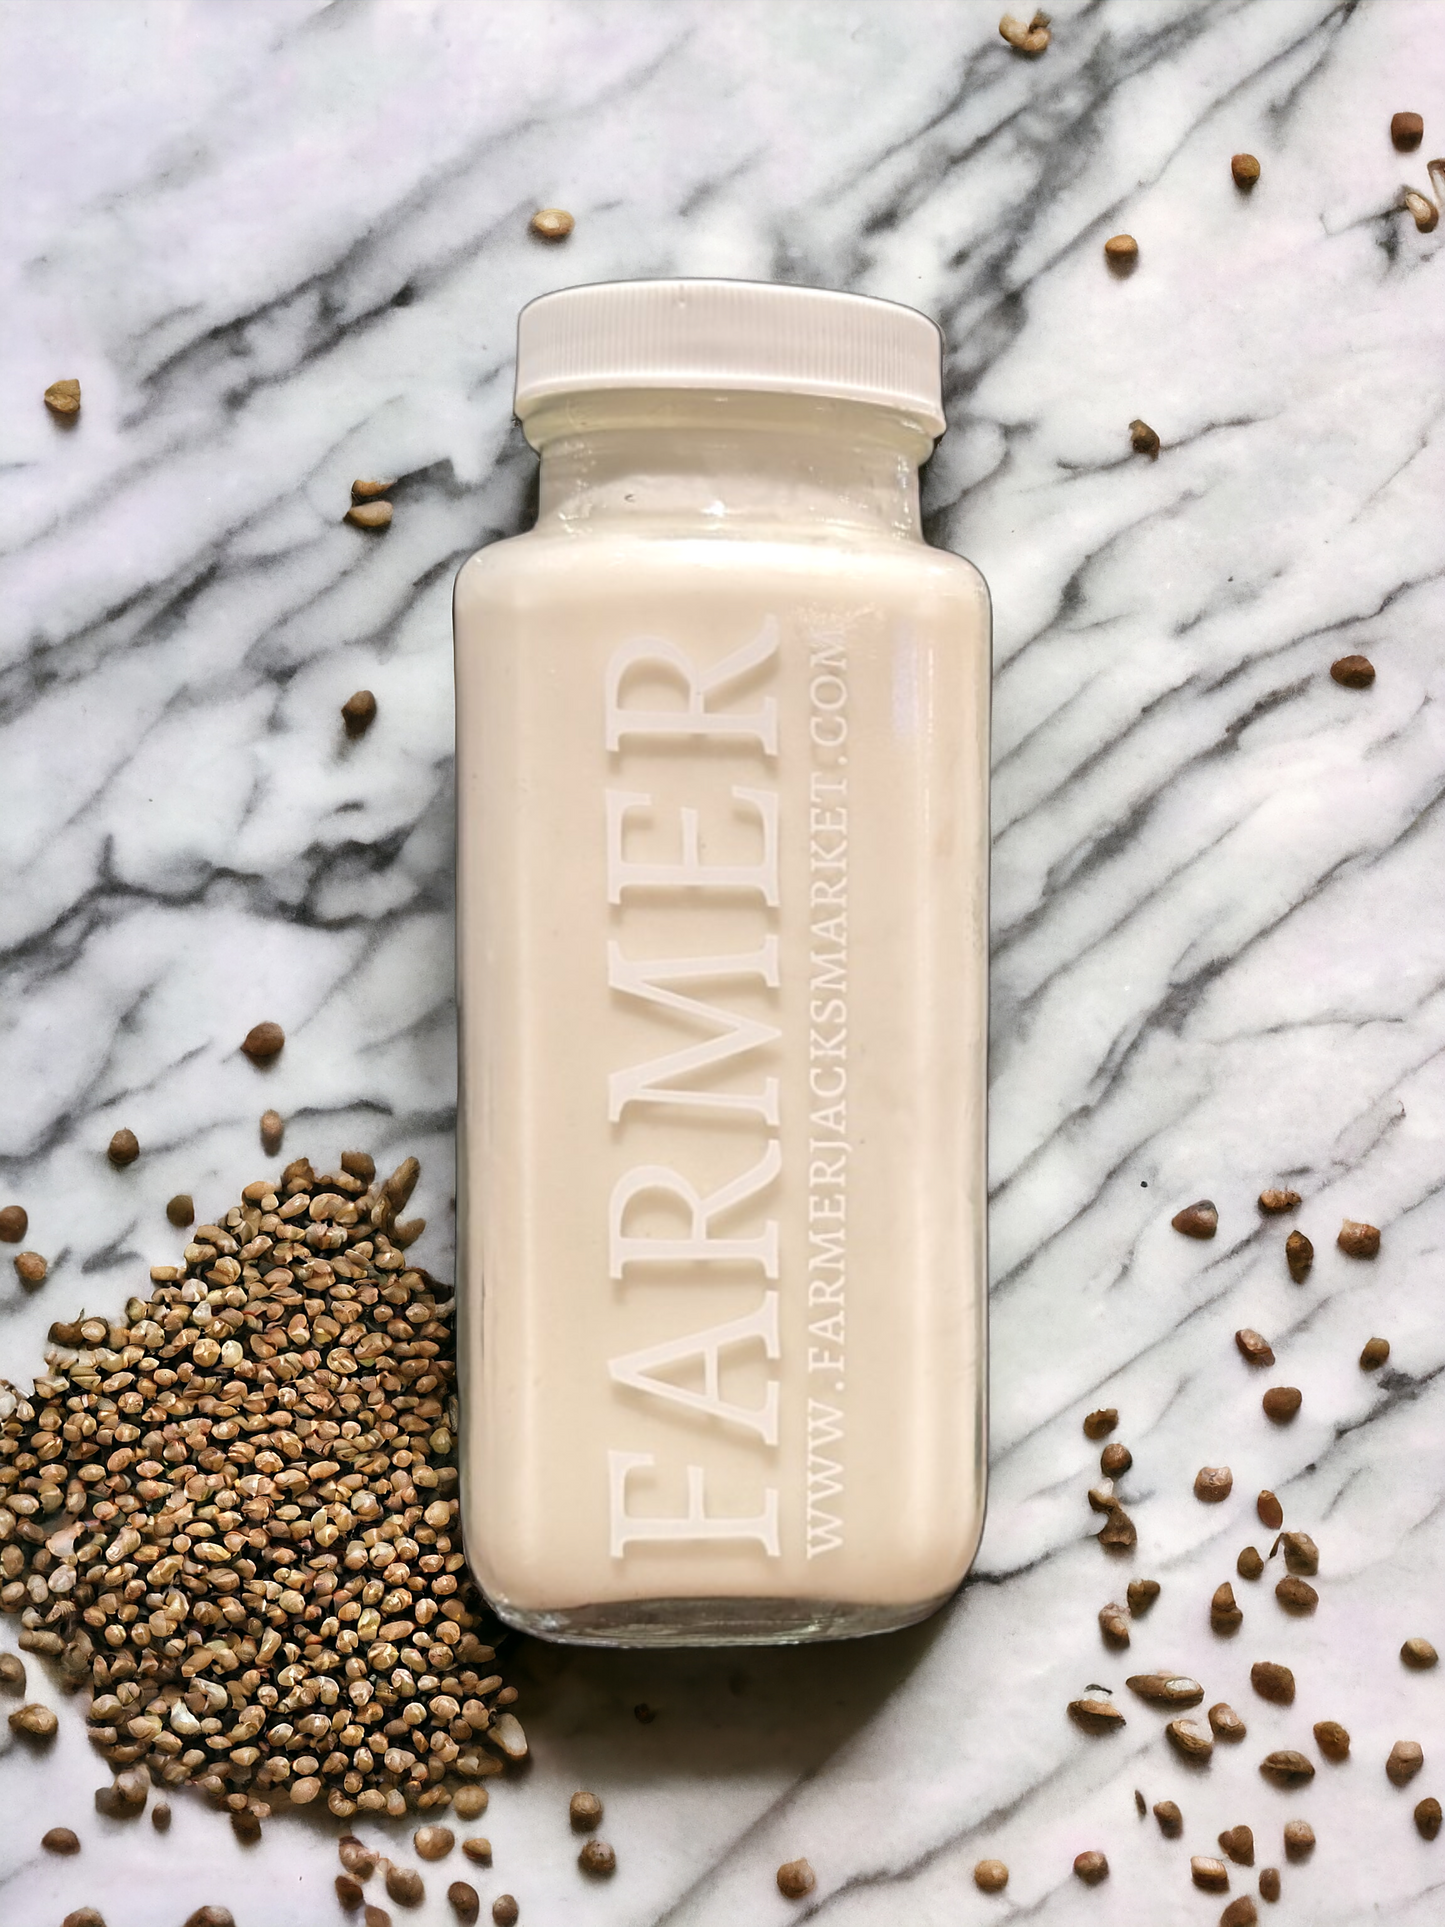 A rectangular glass bottle of white hemp milk against a marble backdrop with hemp seeds scattered around it.